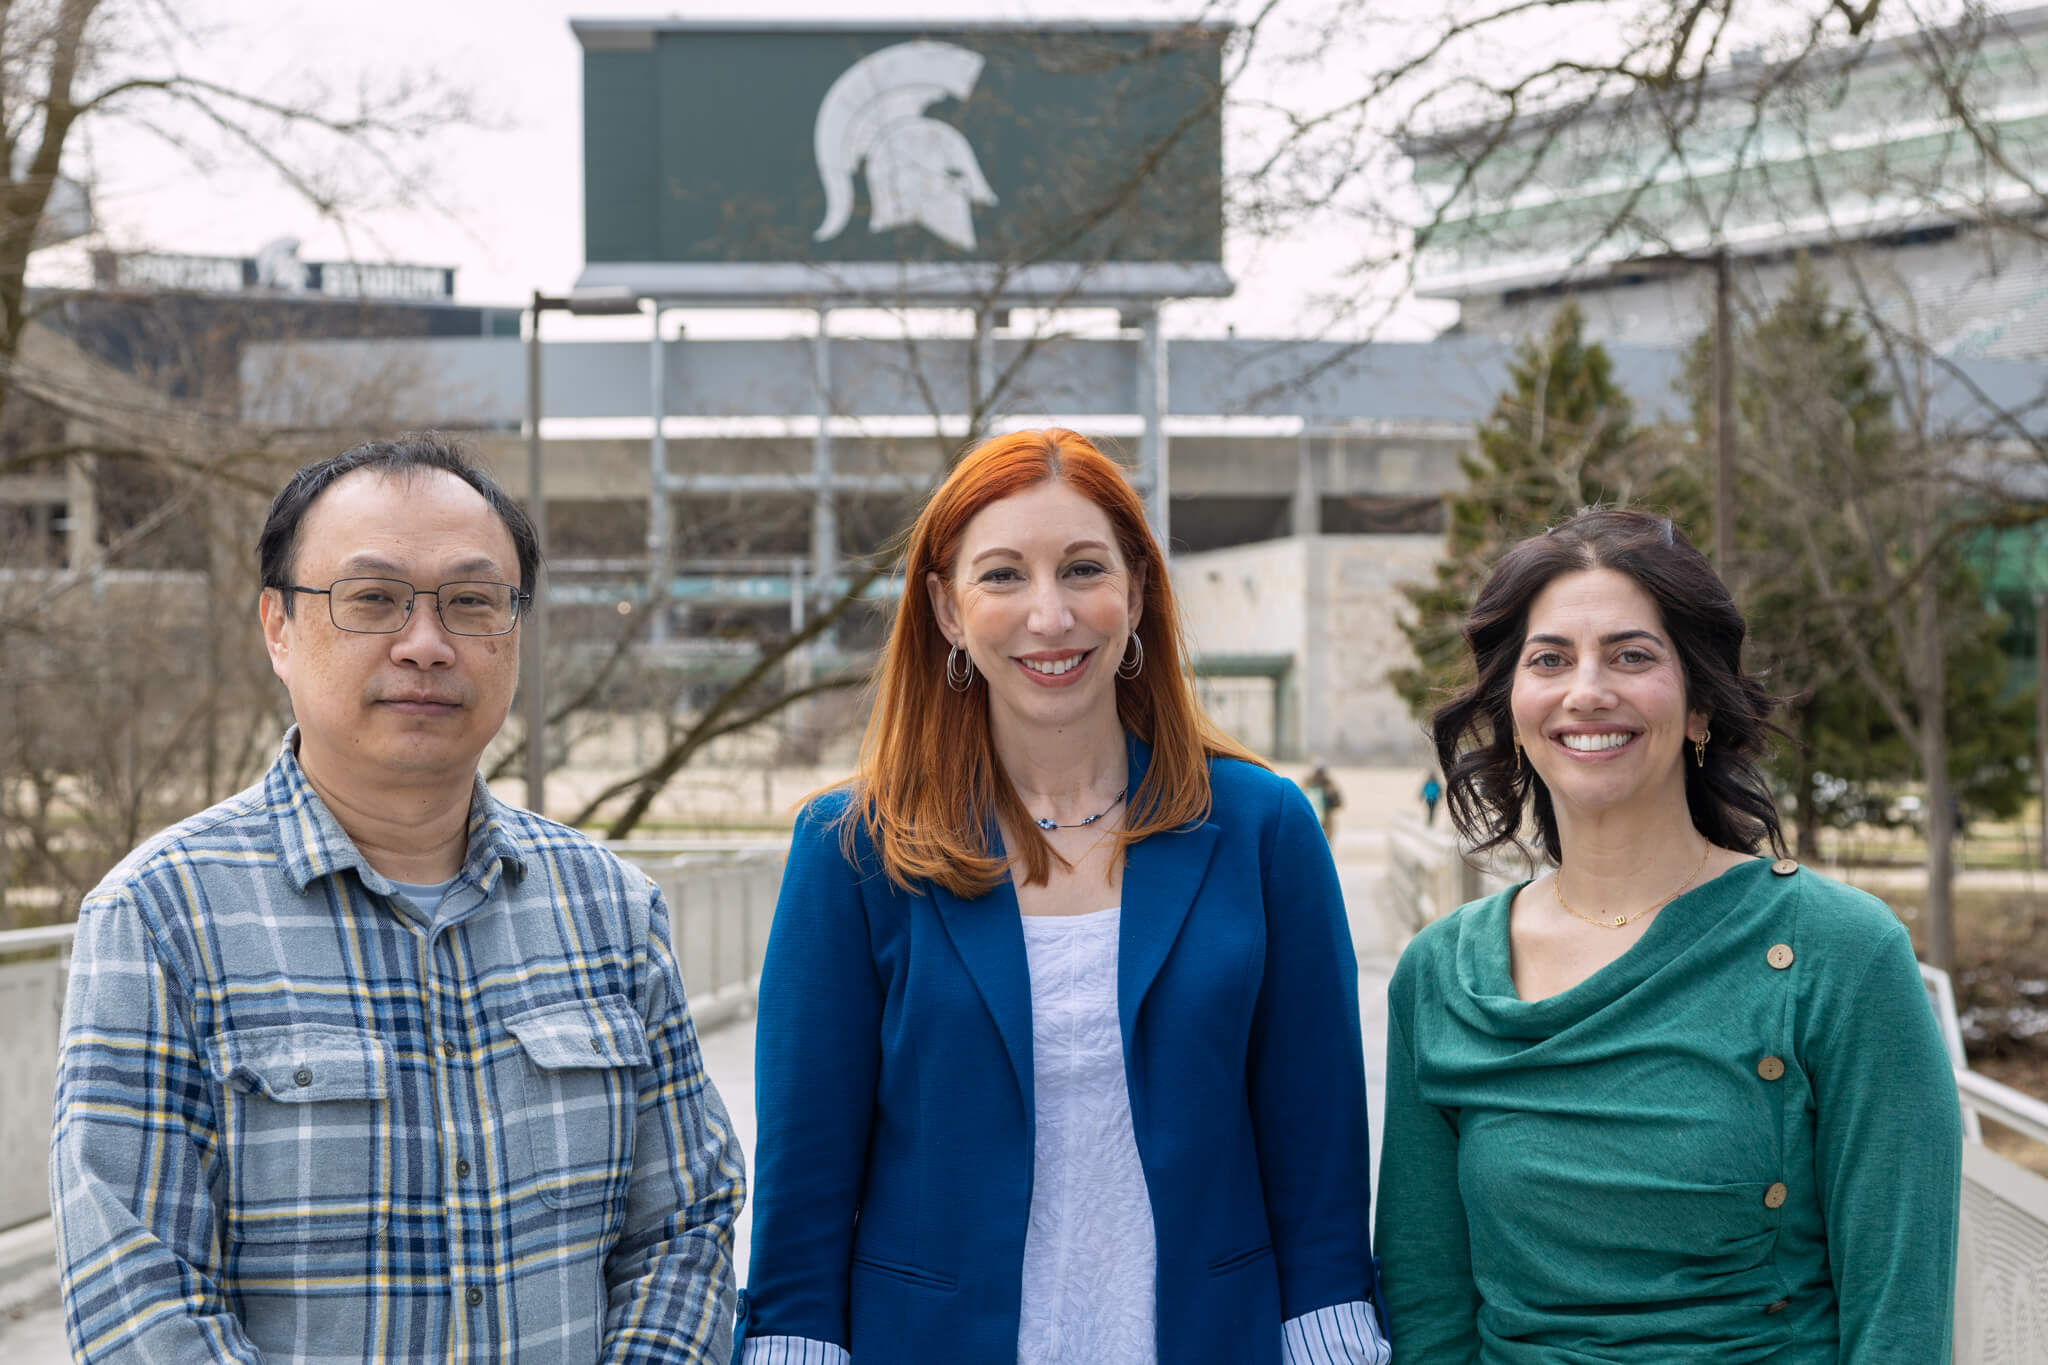 Shinhan Shiu, Gina Leinninger and Elise Zipkin (left to right) are the first faculty members of the College of Natural Science to be awarded the title of Red Cedar Distinguished Professors. Credit: Paul Henderson/MSU